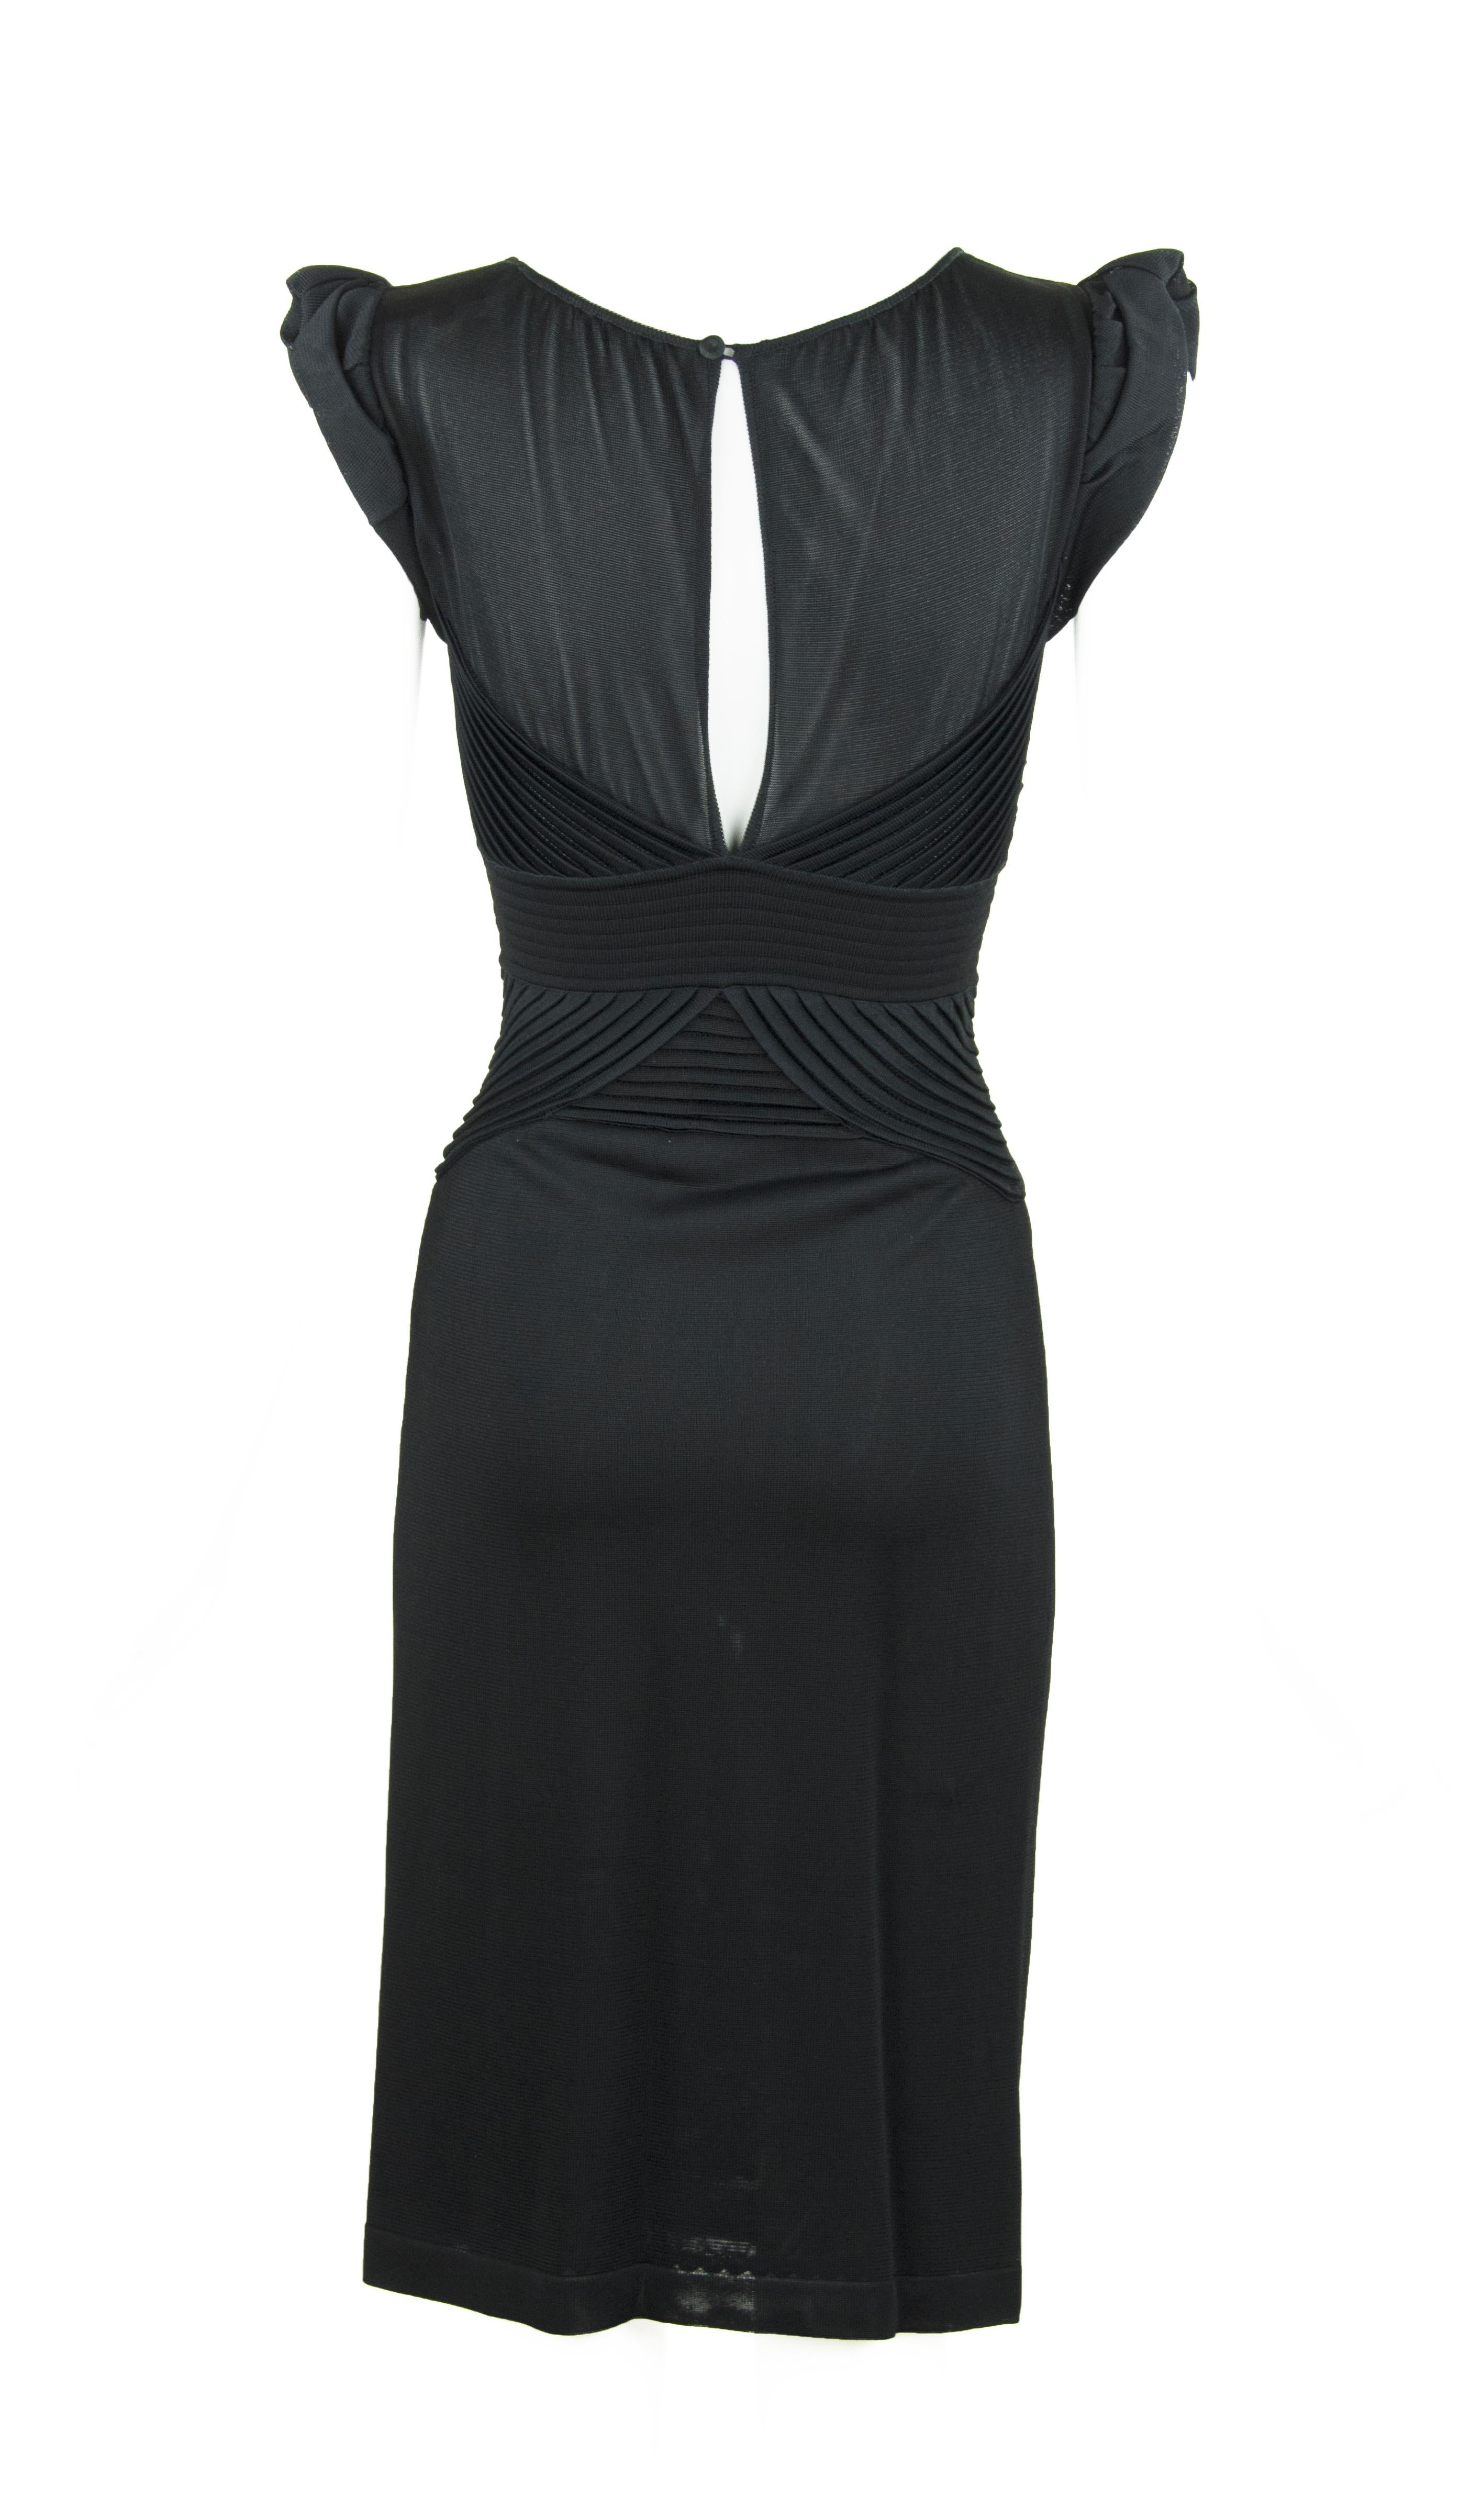 Christian Lacroix Black Knit Dress  In Excellent Condition For Sale In Newport, RI